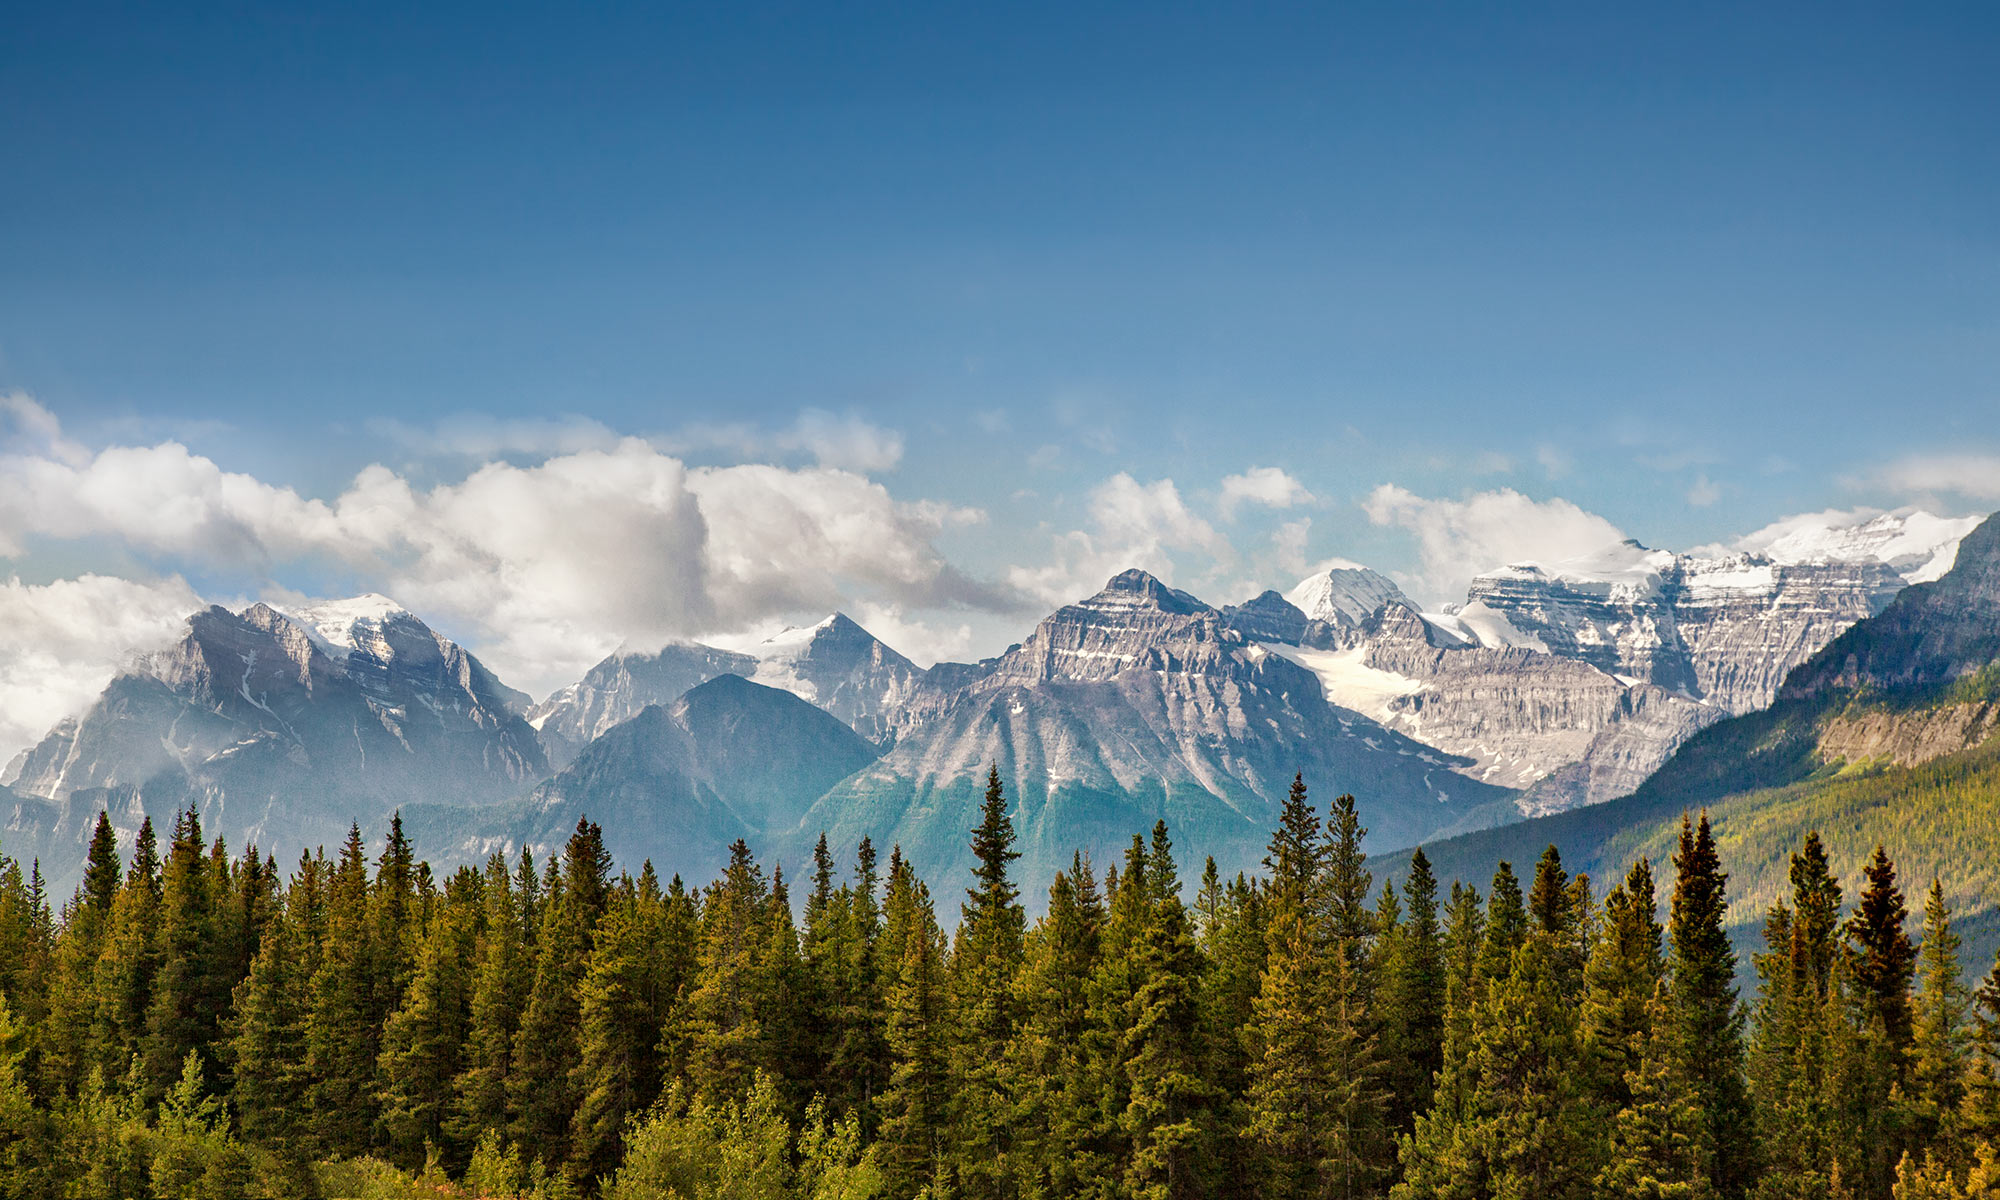 Panoramic view of snow capped rocky mountains with a line of forest tree in foreground